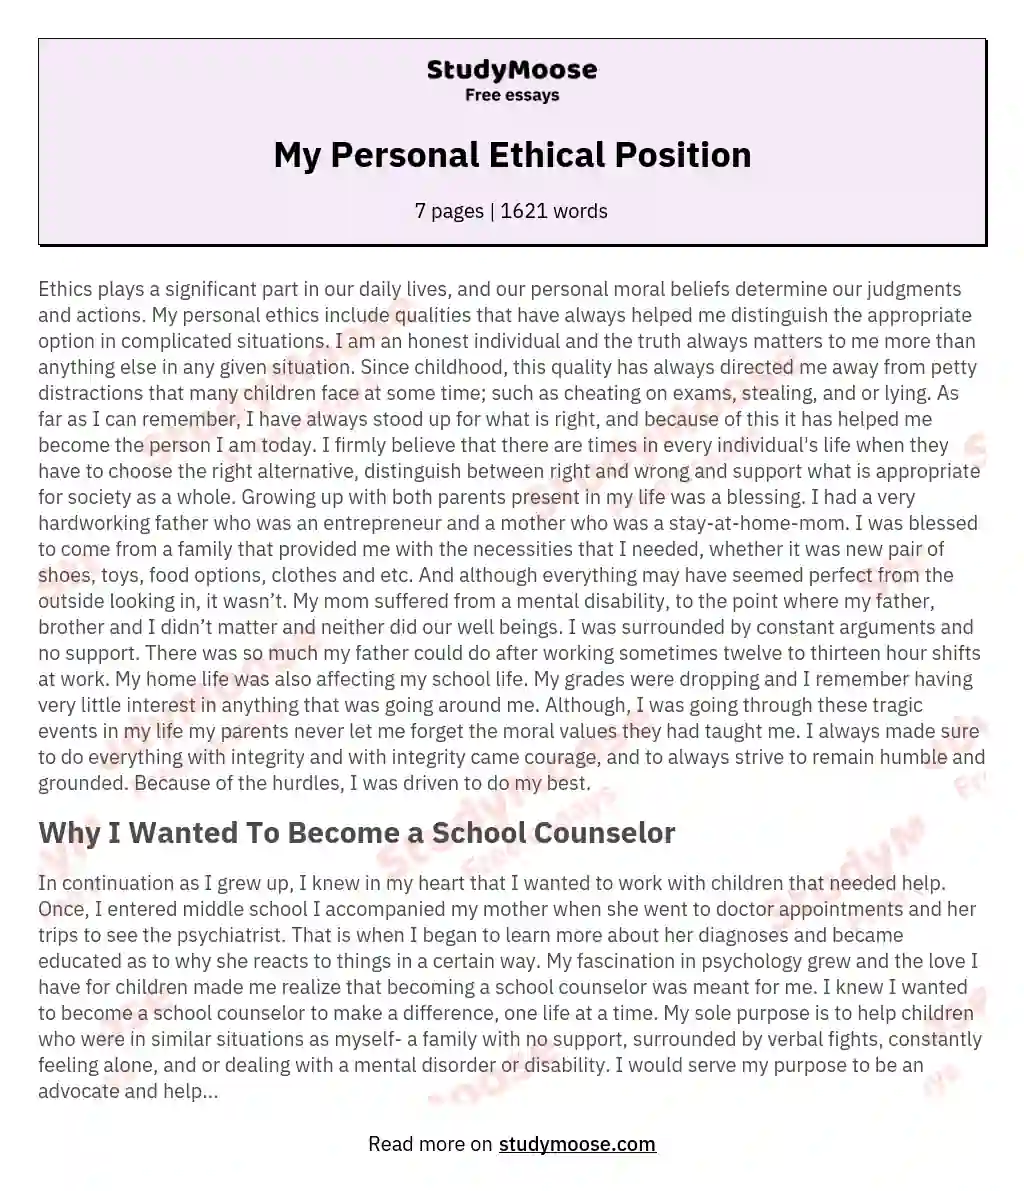 My Personal Ethical Position essay